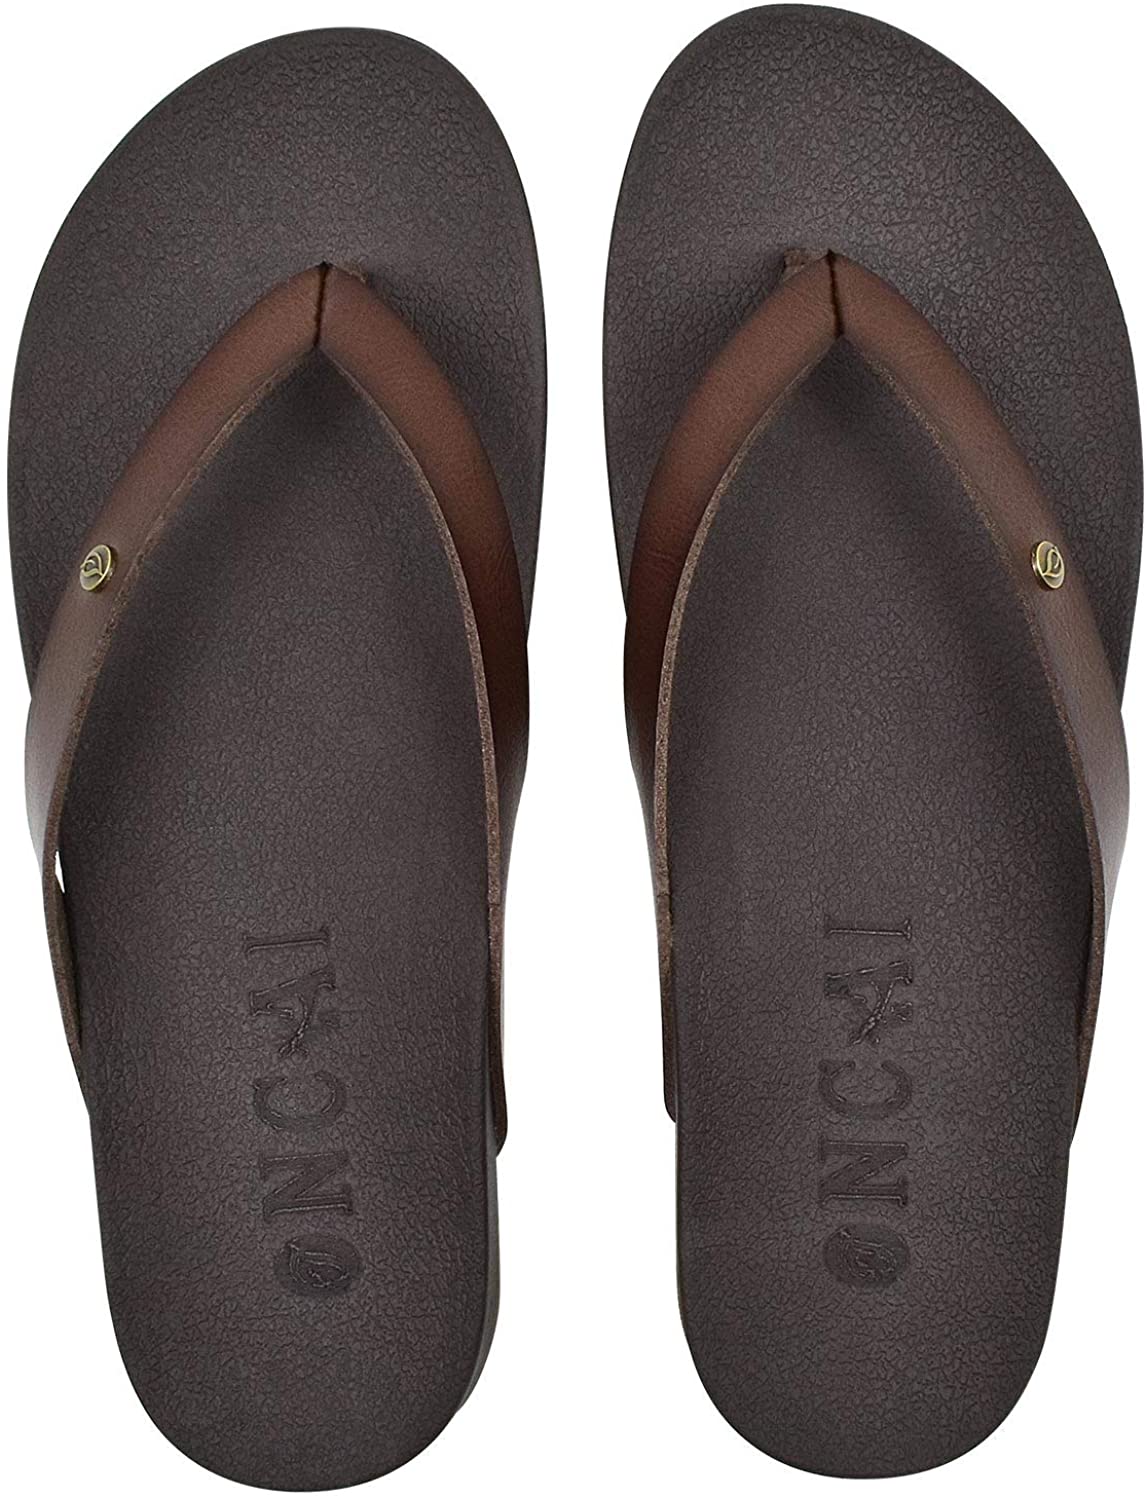 ONCAI Womens Flip Flops for Women Black for Girls Waterproof Outdoor Summer Beach Slippers with arch support Women sandals 